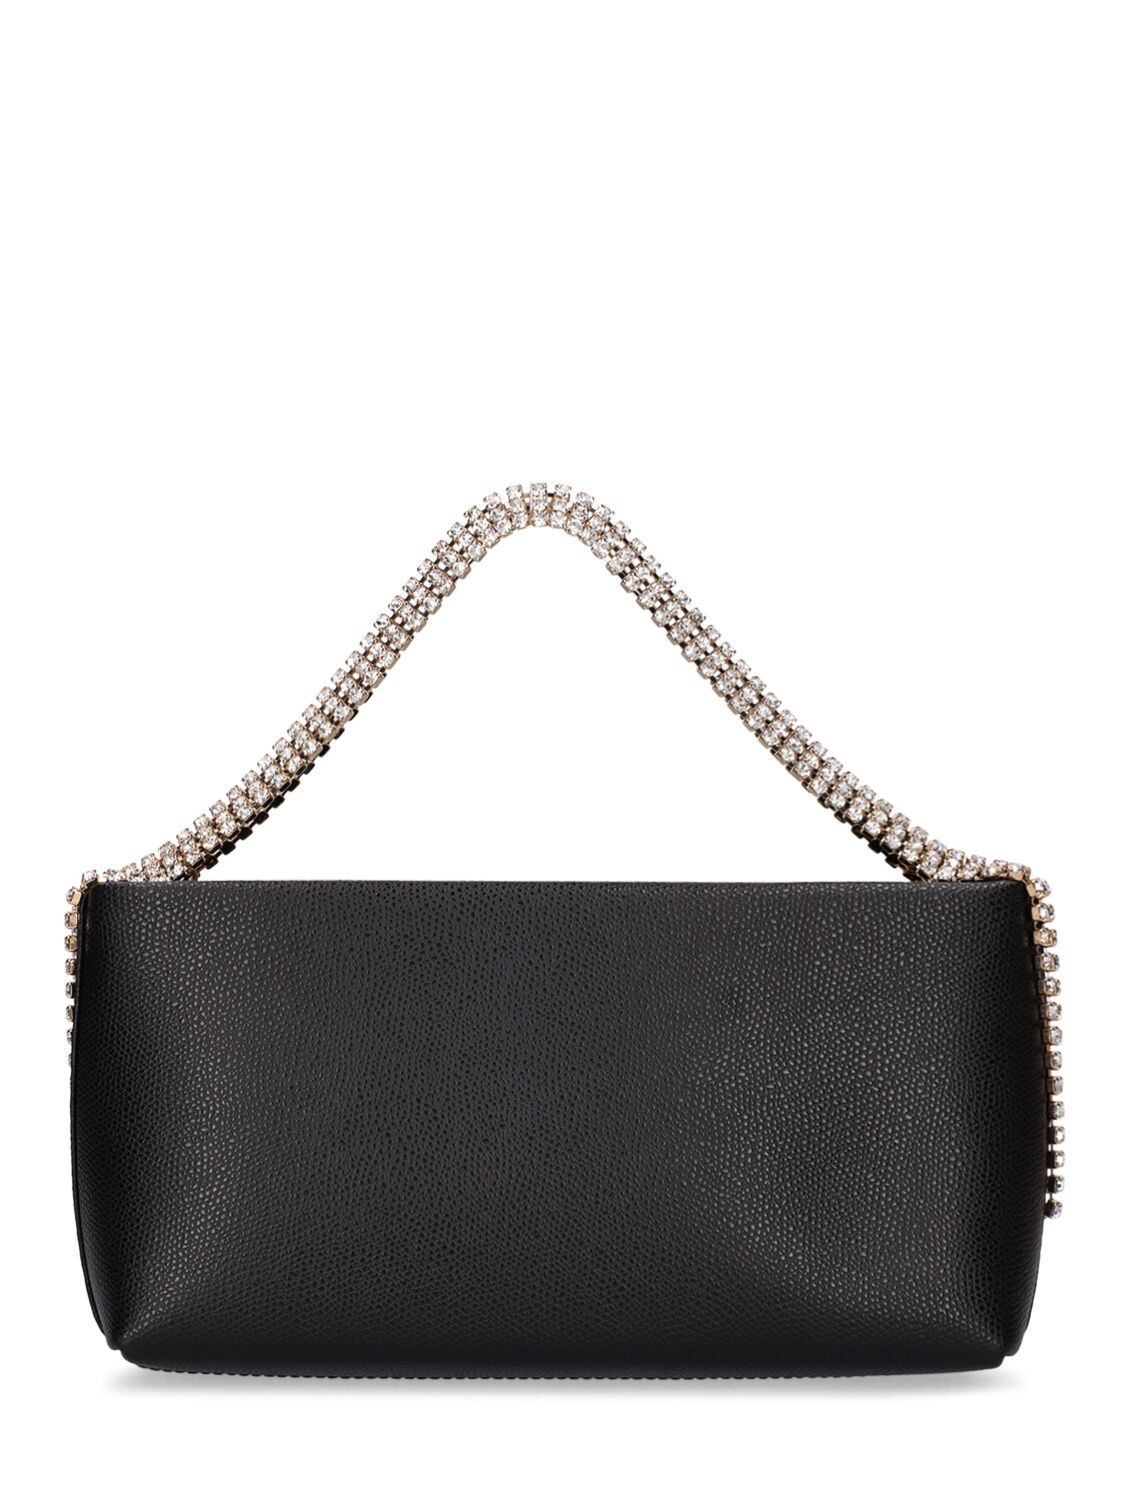 Annabella Leather Top Handle Bag